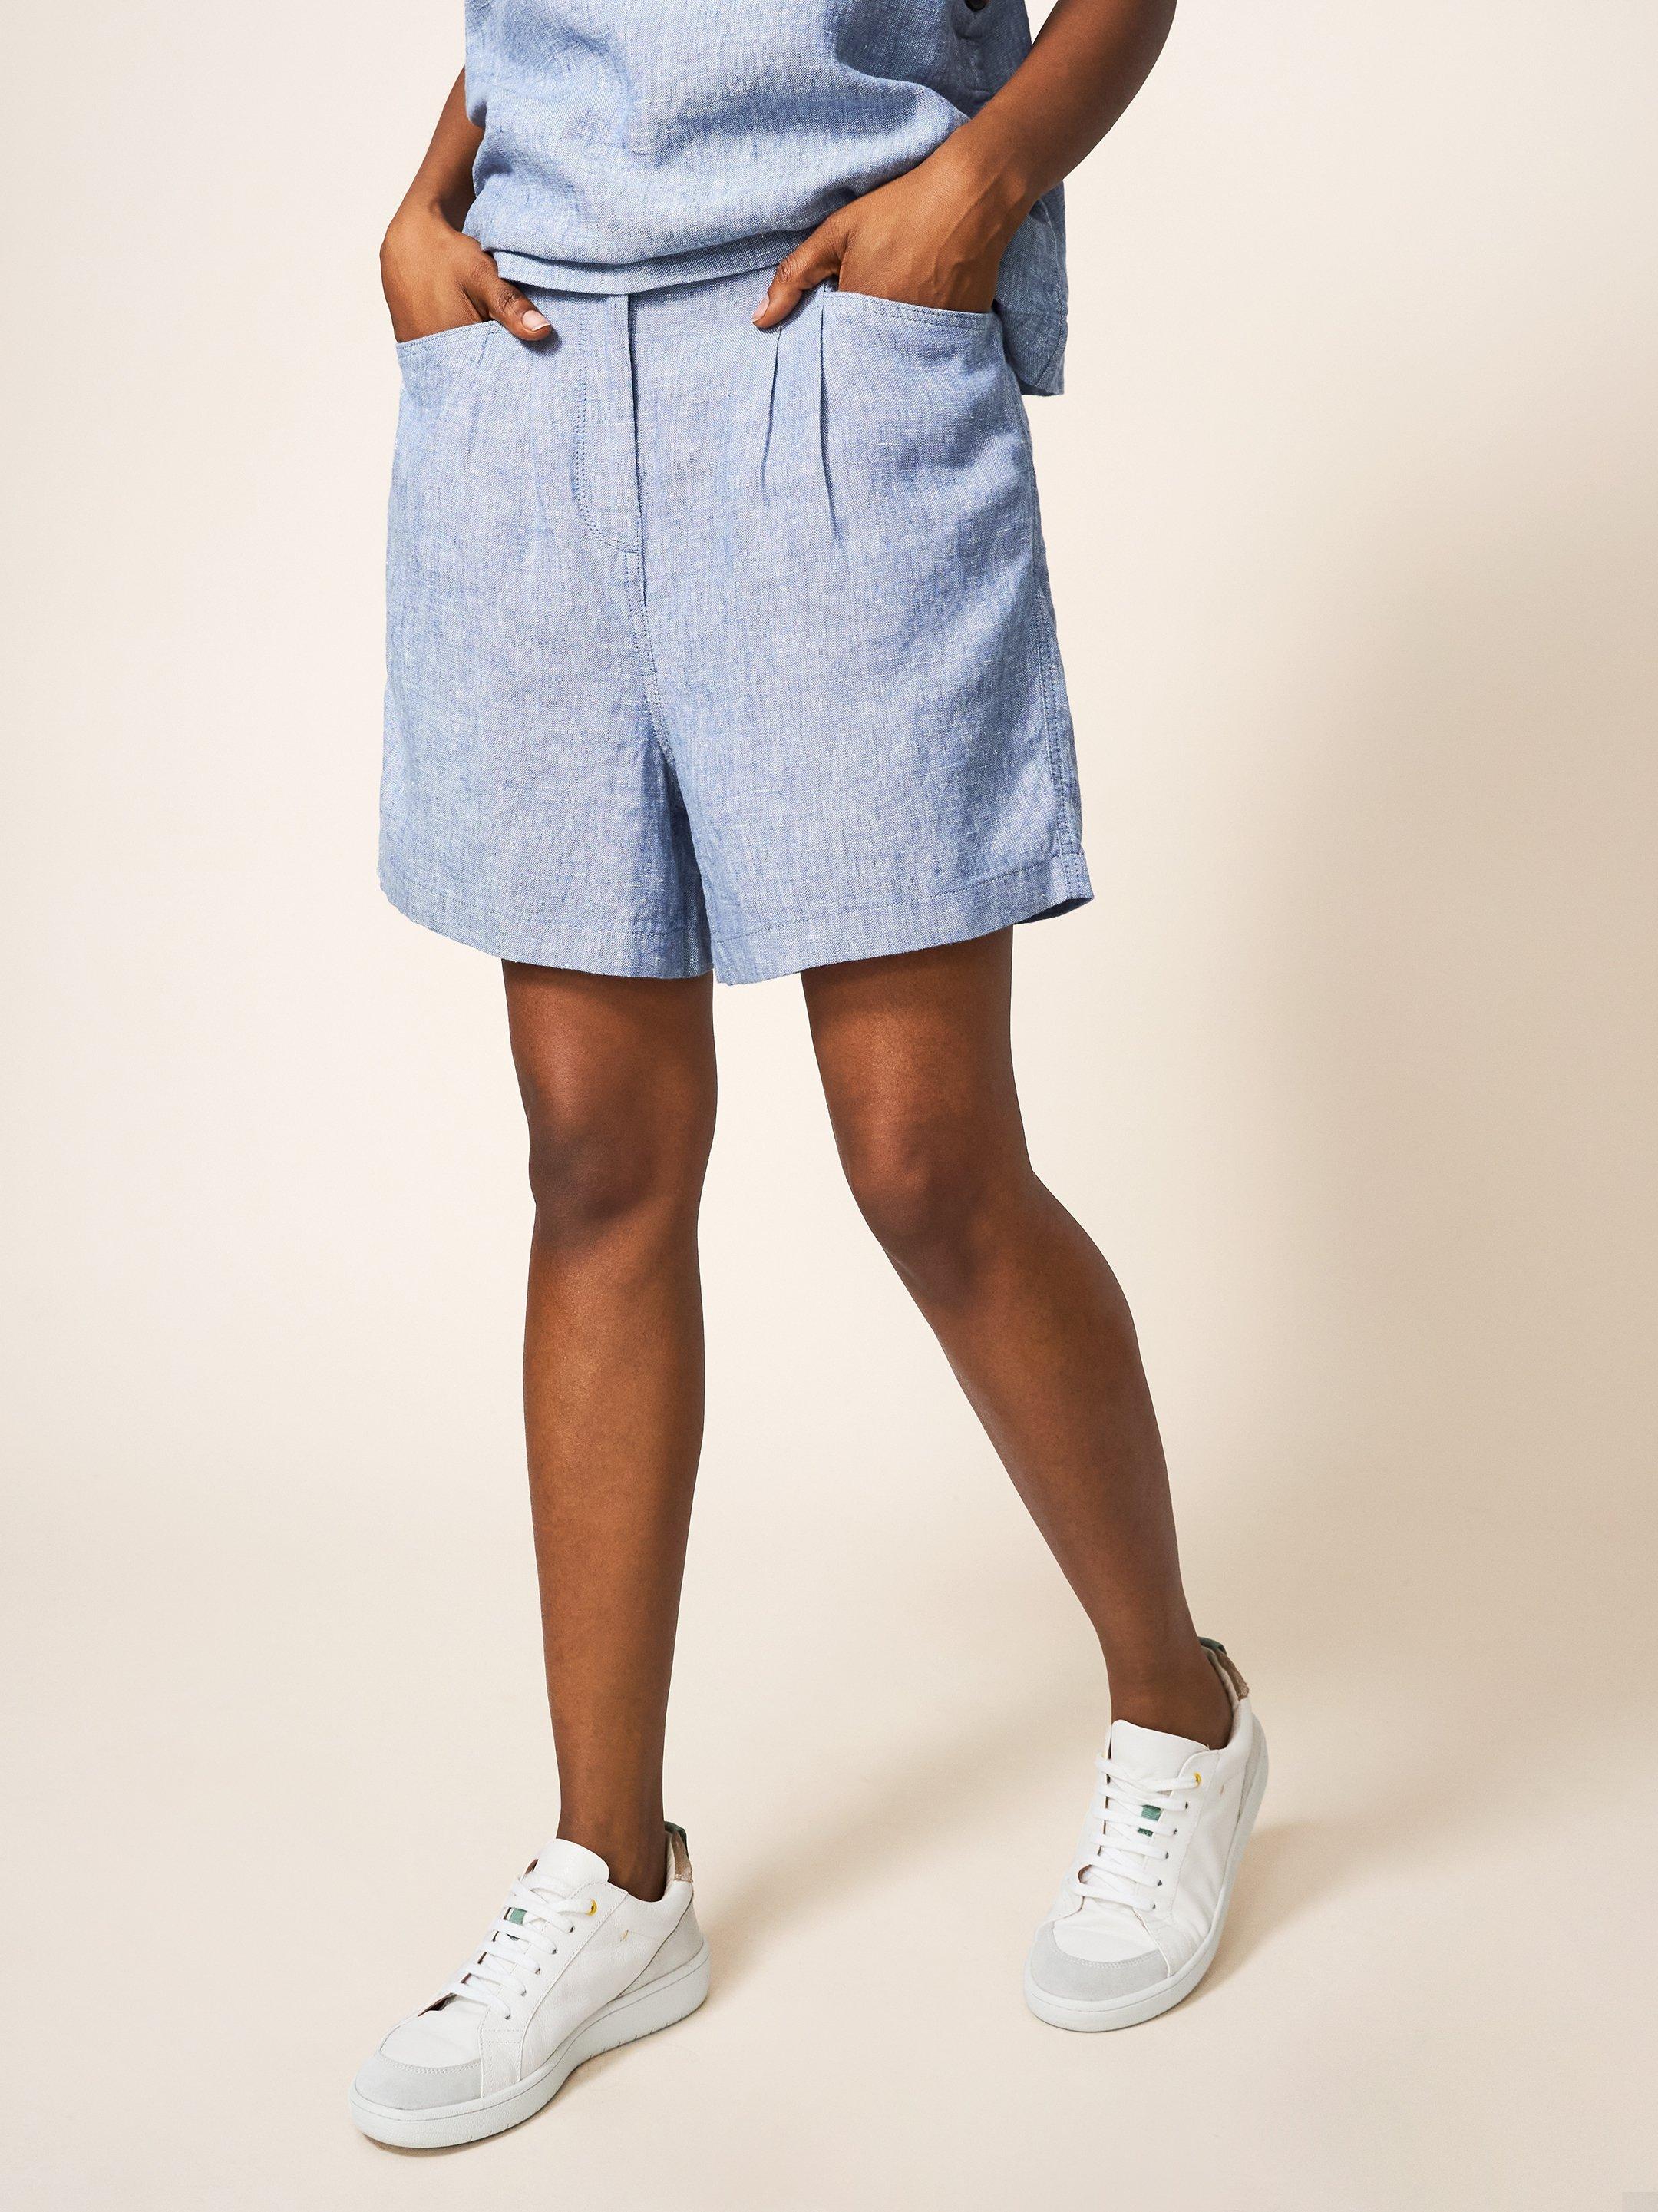 Rowena Linen Short in CHAMB BLUE - MODEL FRONT